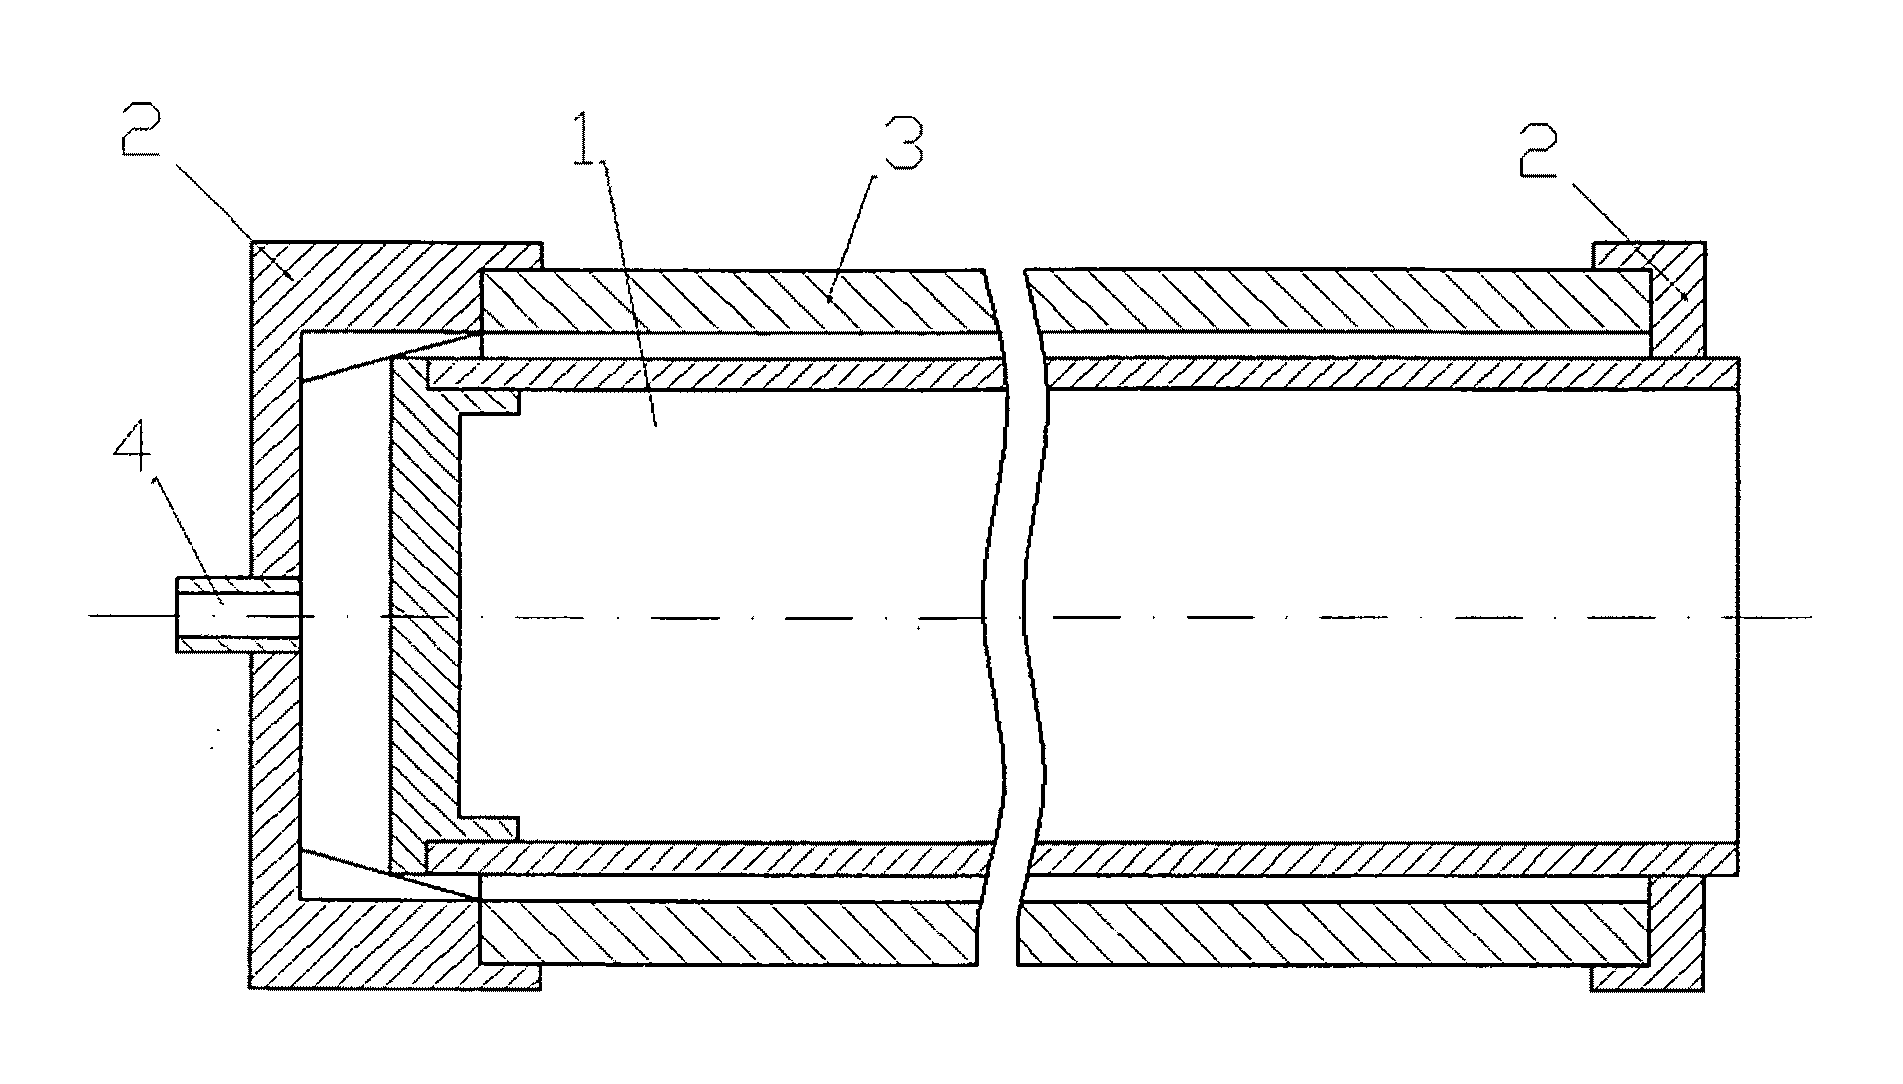 Tubing with an inner coating protecting it against deposits and a method for applying said coating